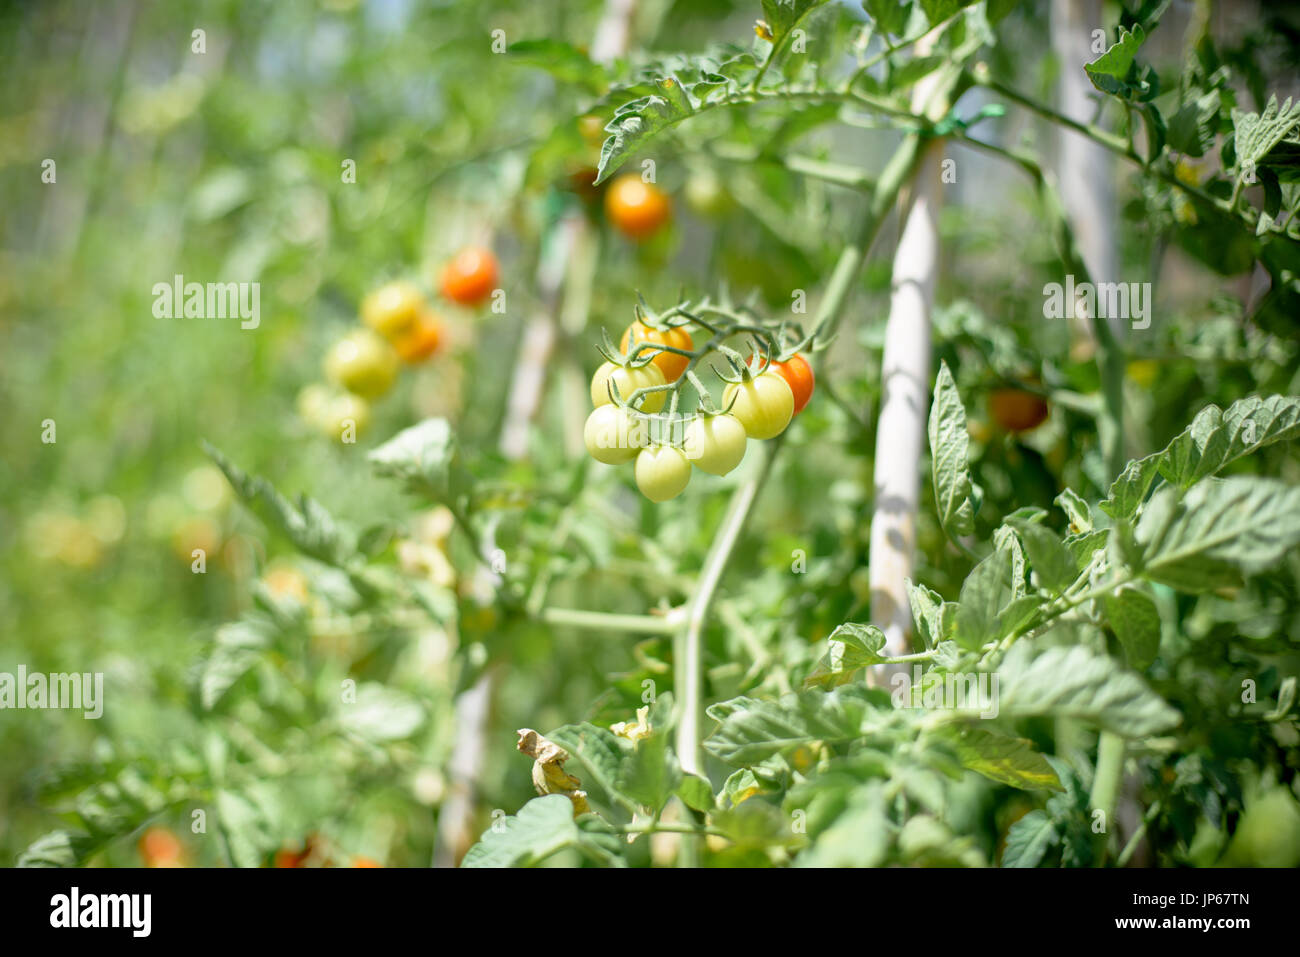 Extreme close up and selective focused bunch of cherry tomato fruits on branch plant in vegetable garden Stock Photo